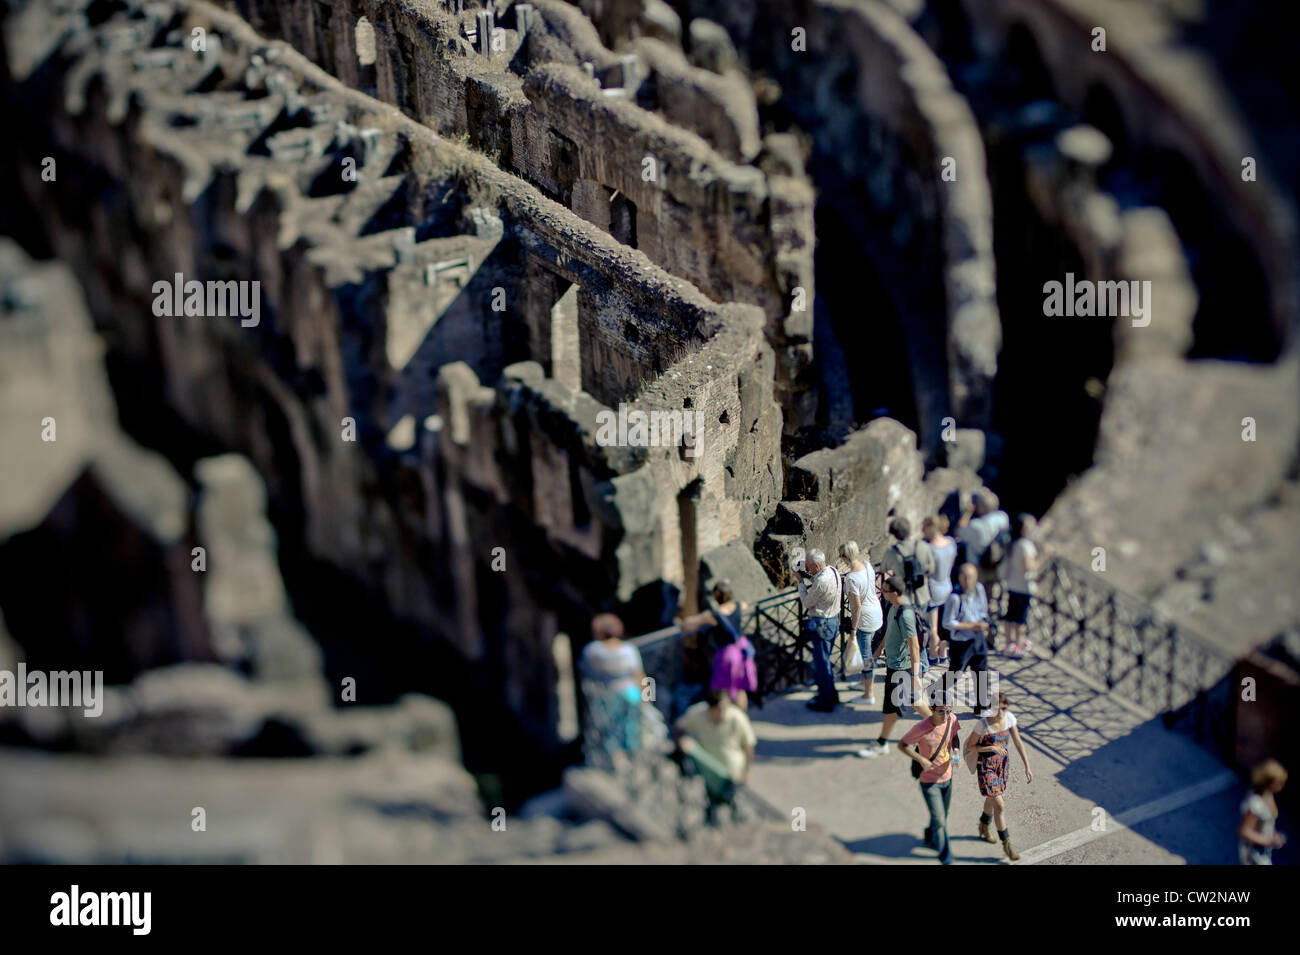 Tourists visiting the Colosseum, Rome, Italy Stock Photo